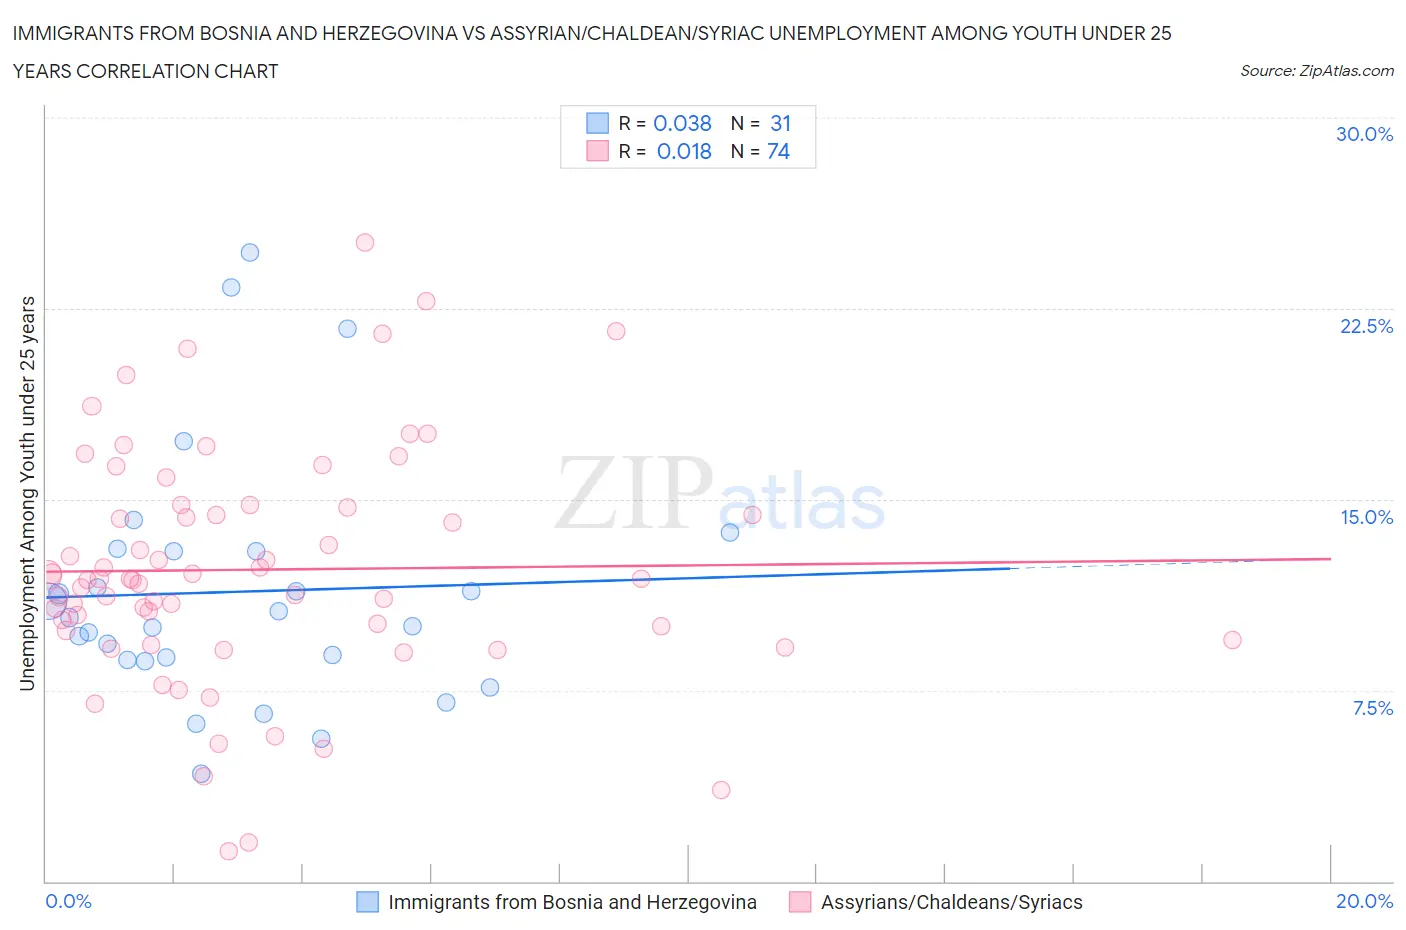 Immigrants from Bosnia and Herzegovina vs Assyrian/Chaldean/Syriac Unemployment Among Youth under 25 years